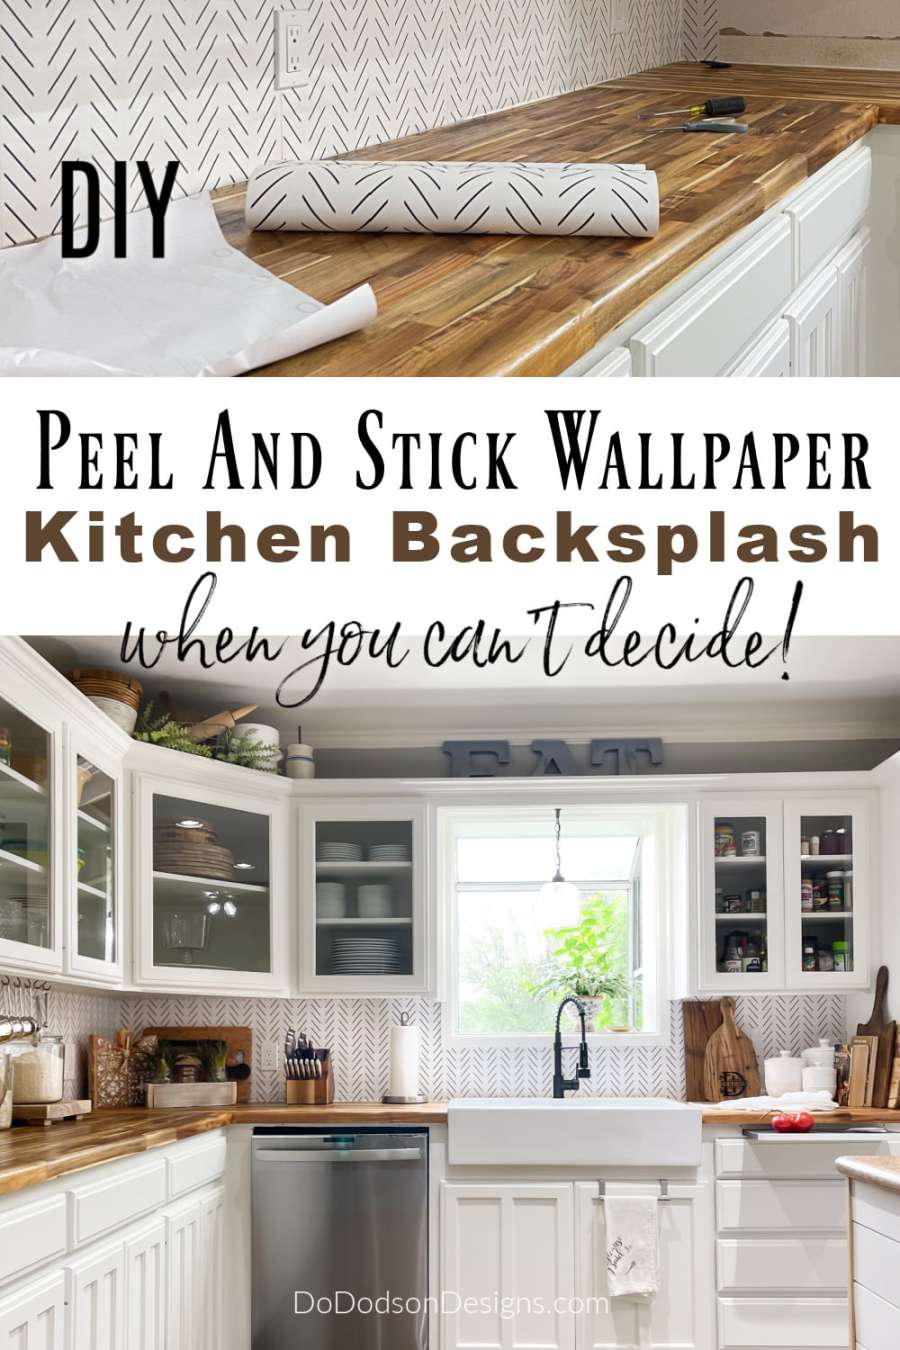 Peel And Stick Kitchen Backsplash (When You Can